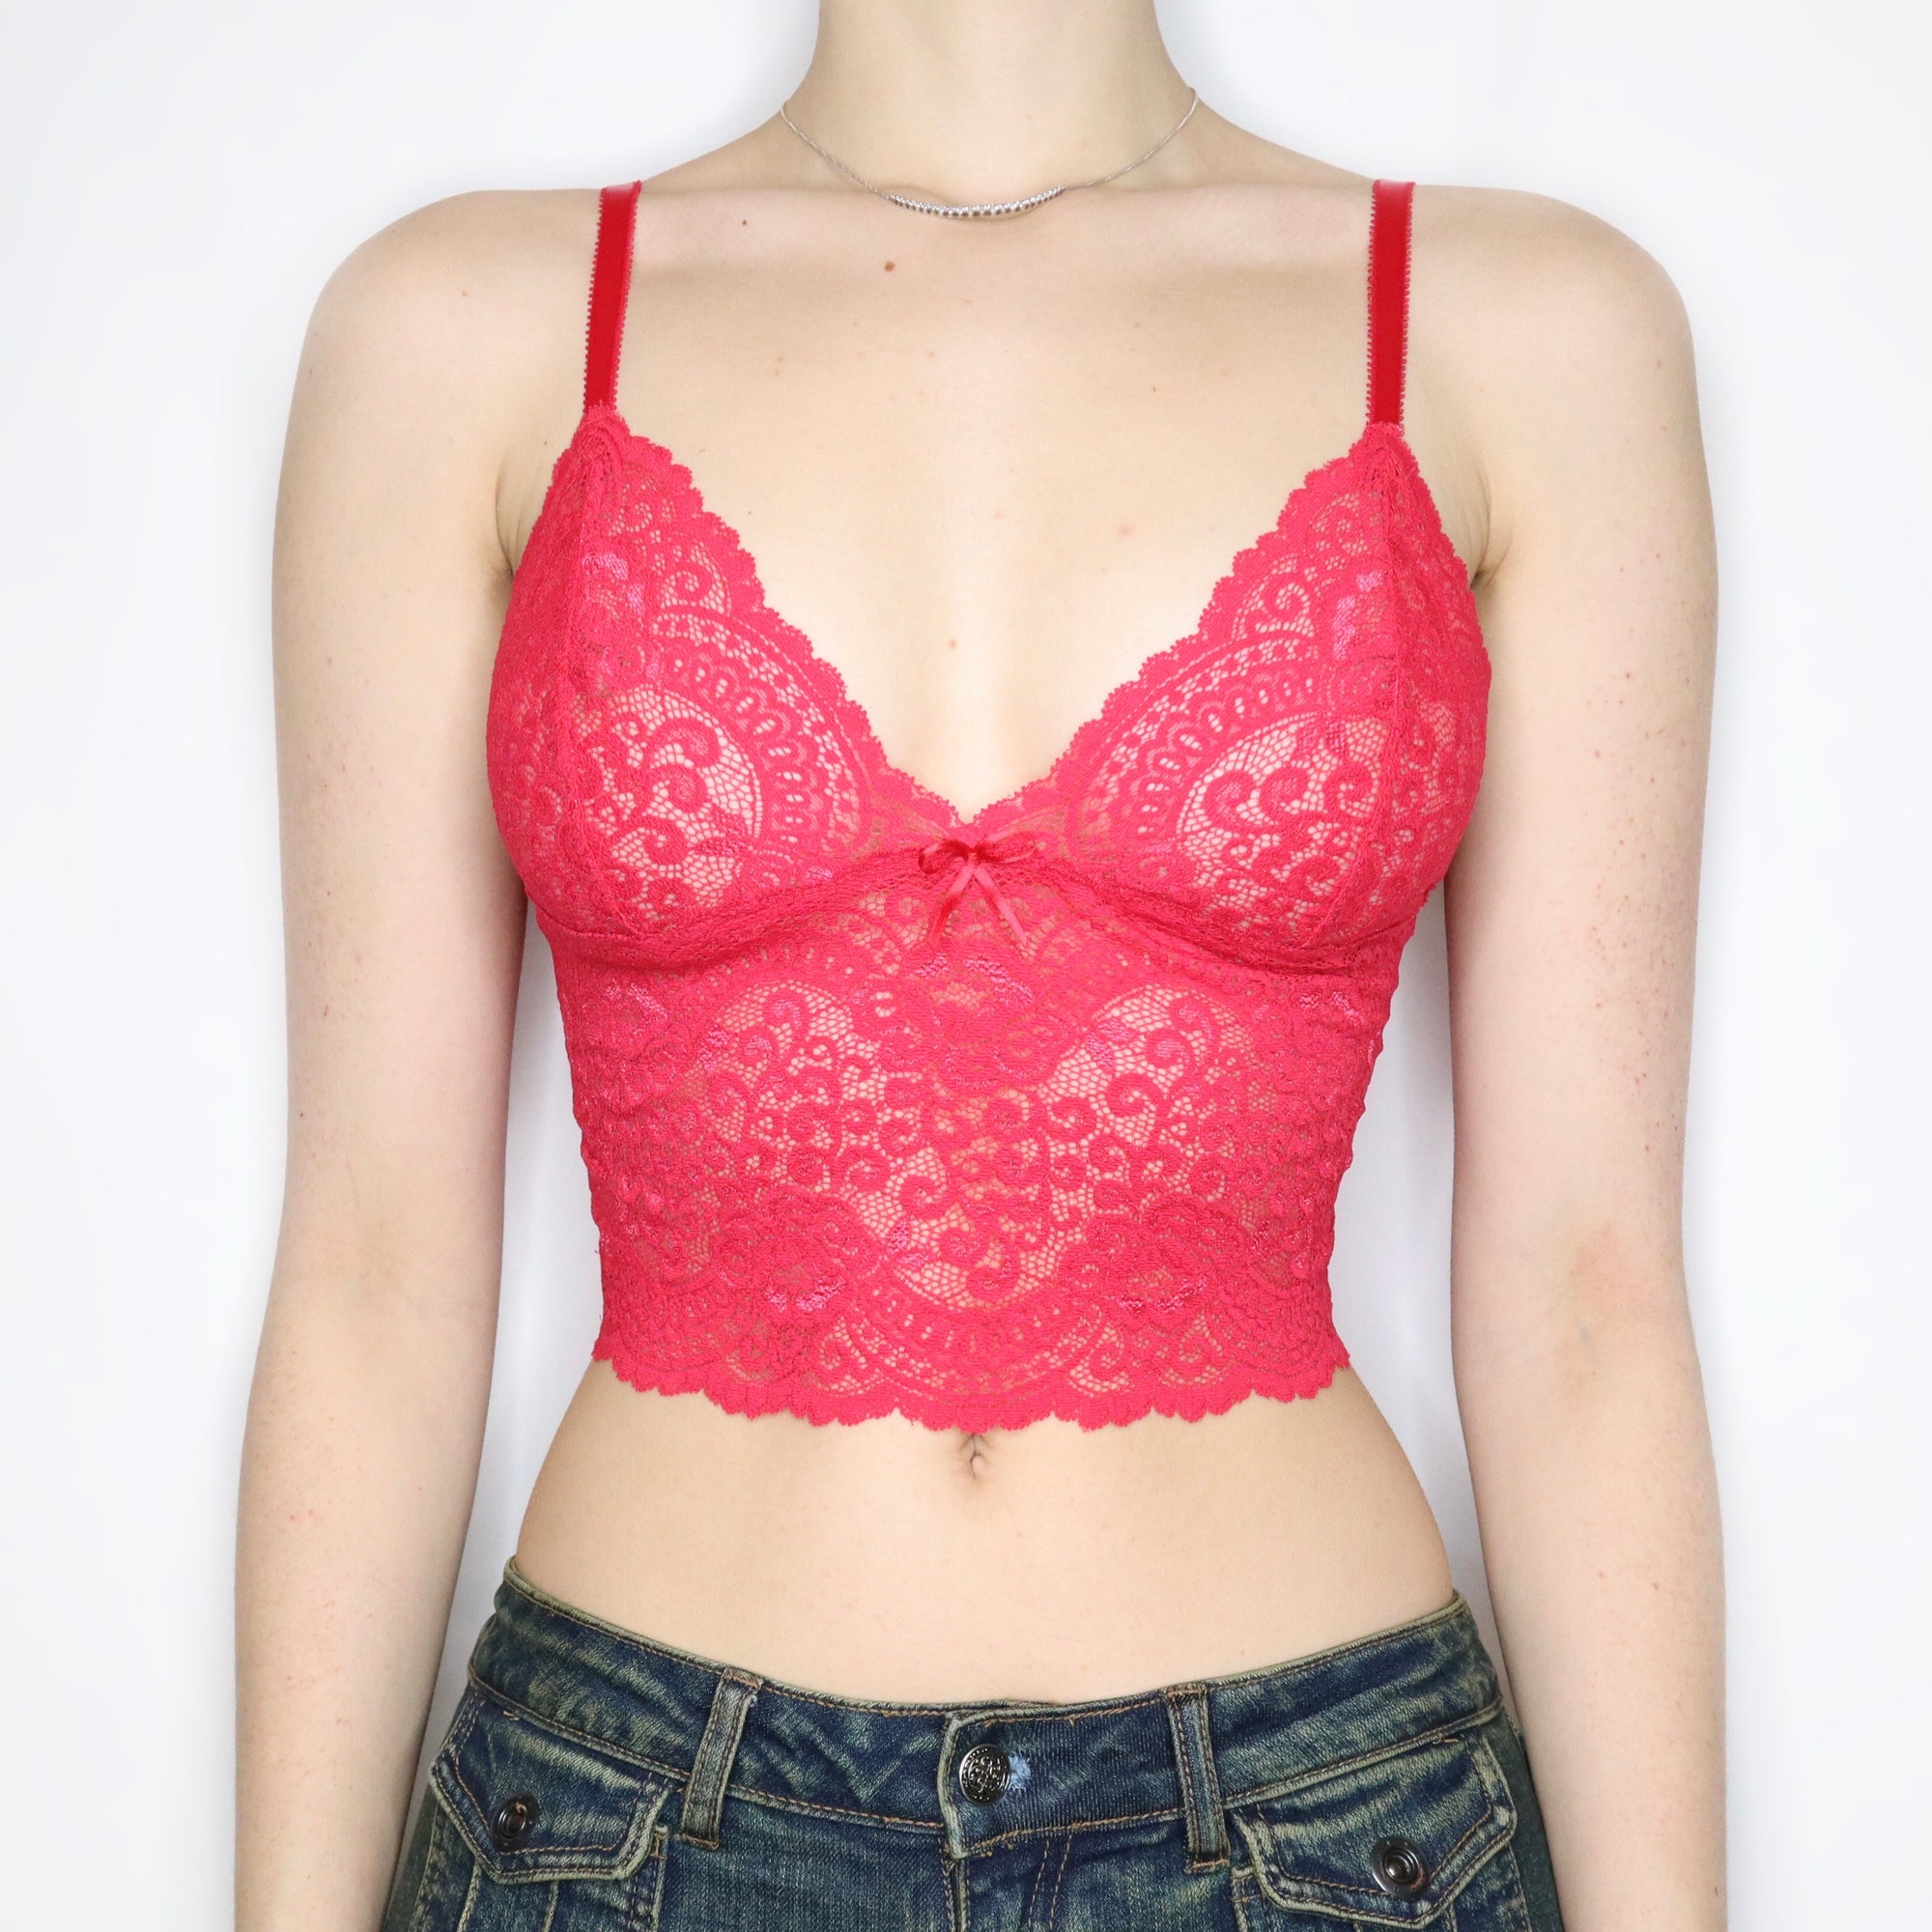 Early 2000s Victoria's Secret Red Lace Bralette